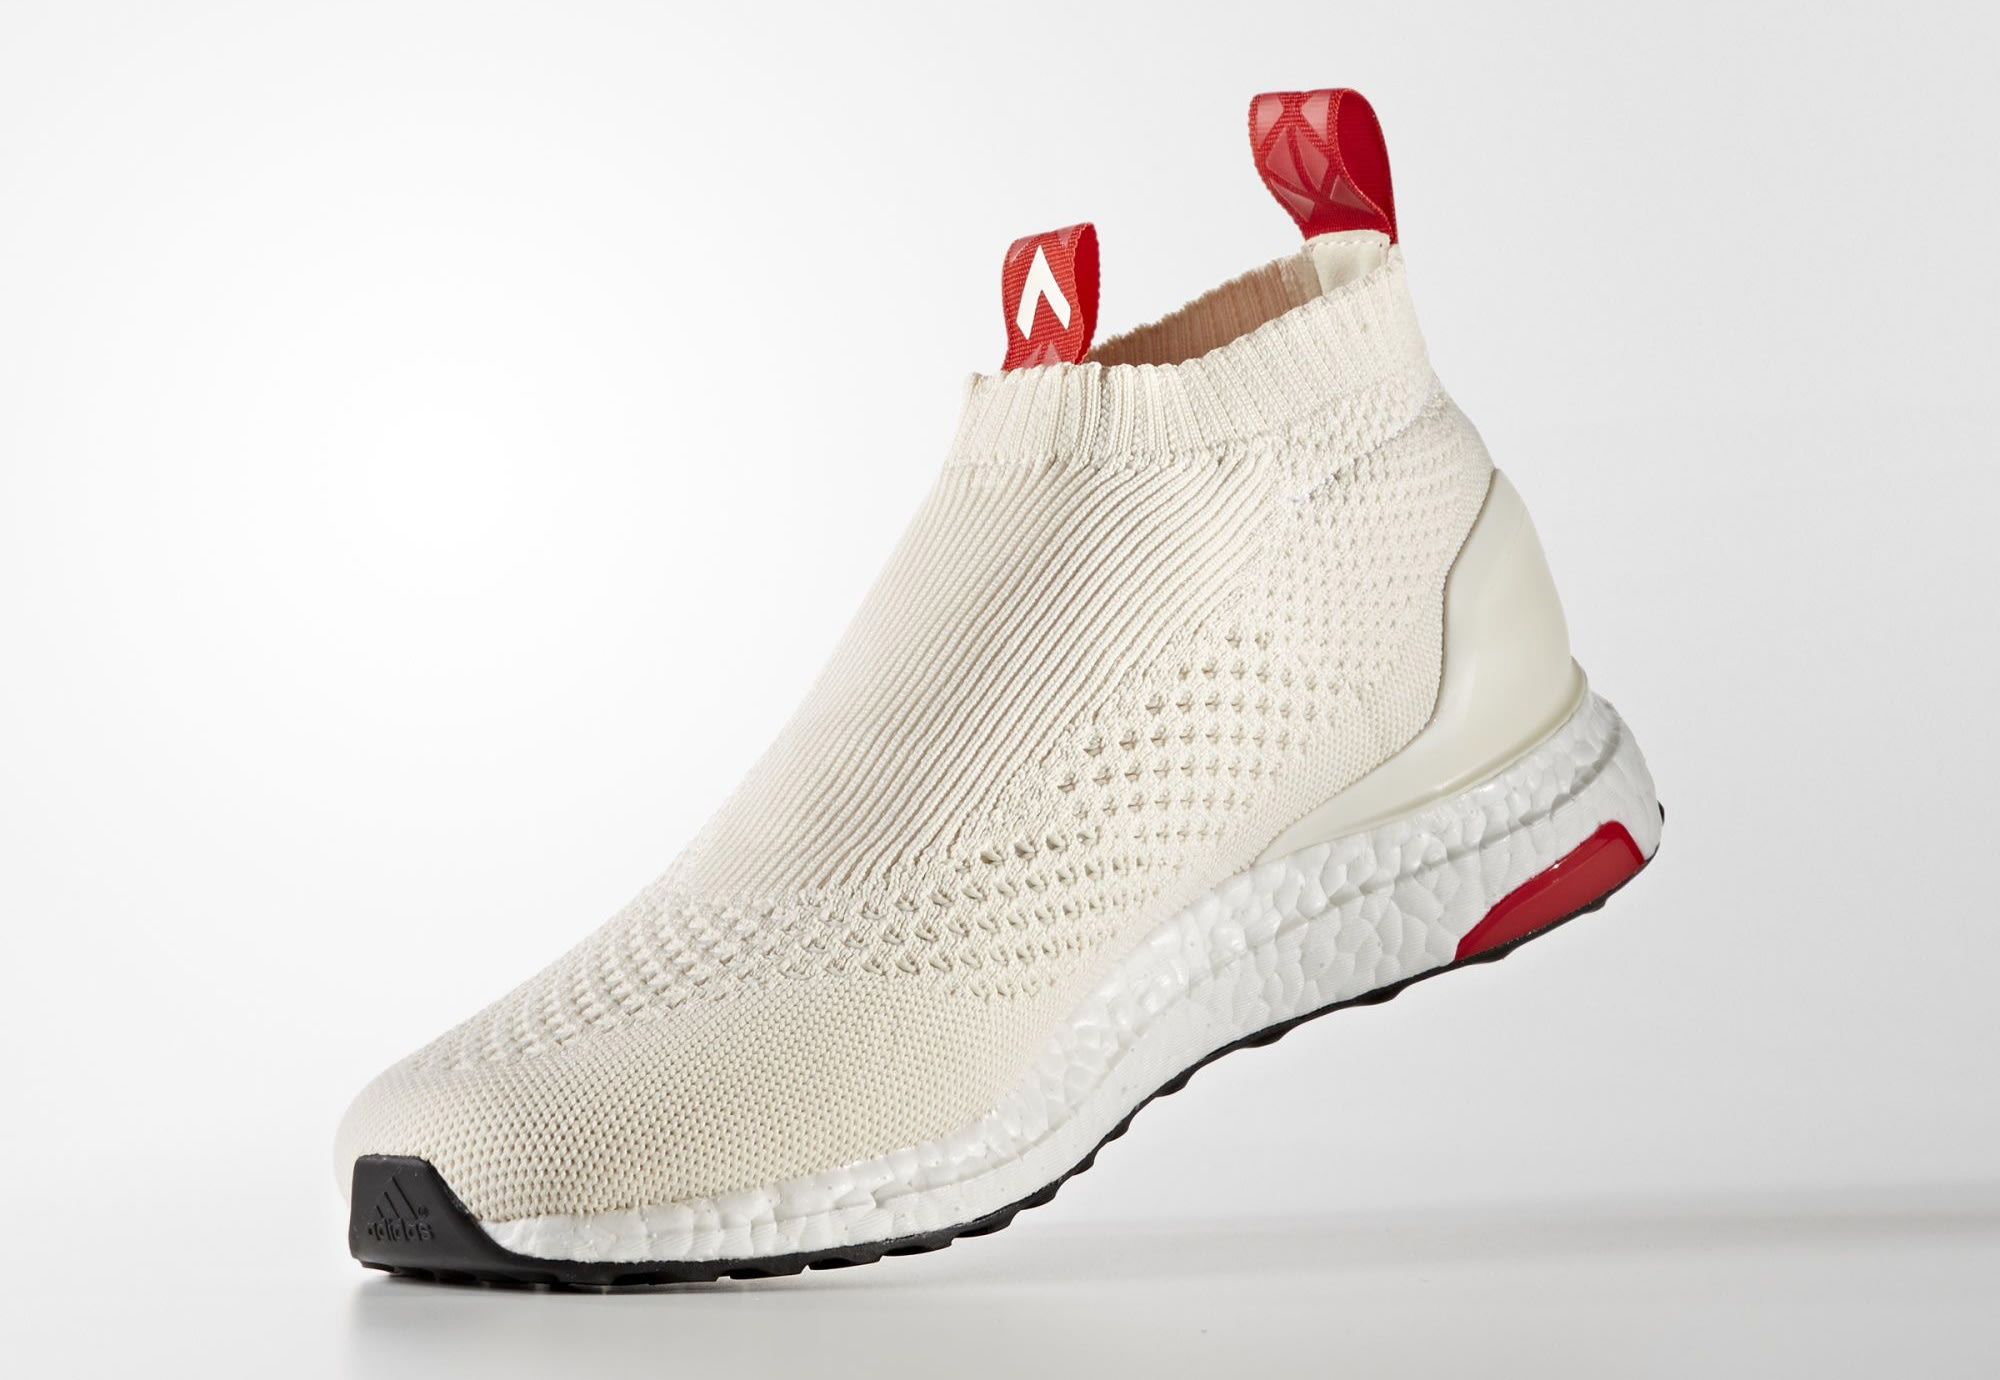 Champagne Adidas Ace 16 Purecontrol BY9091 Medial